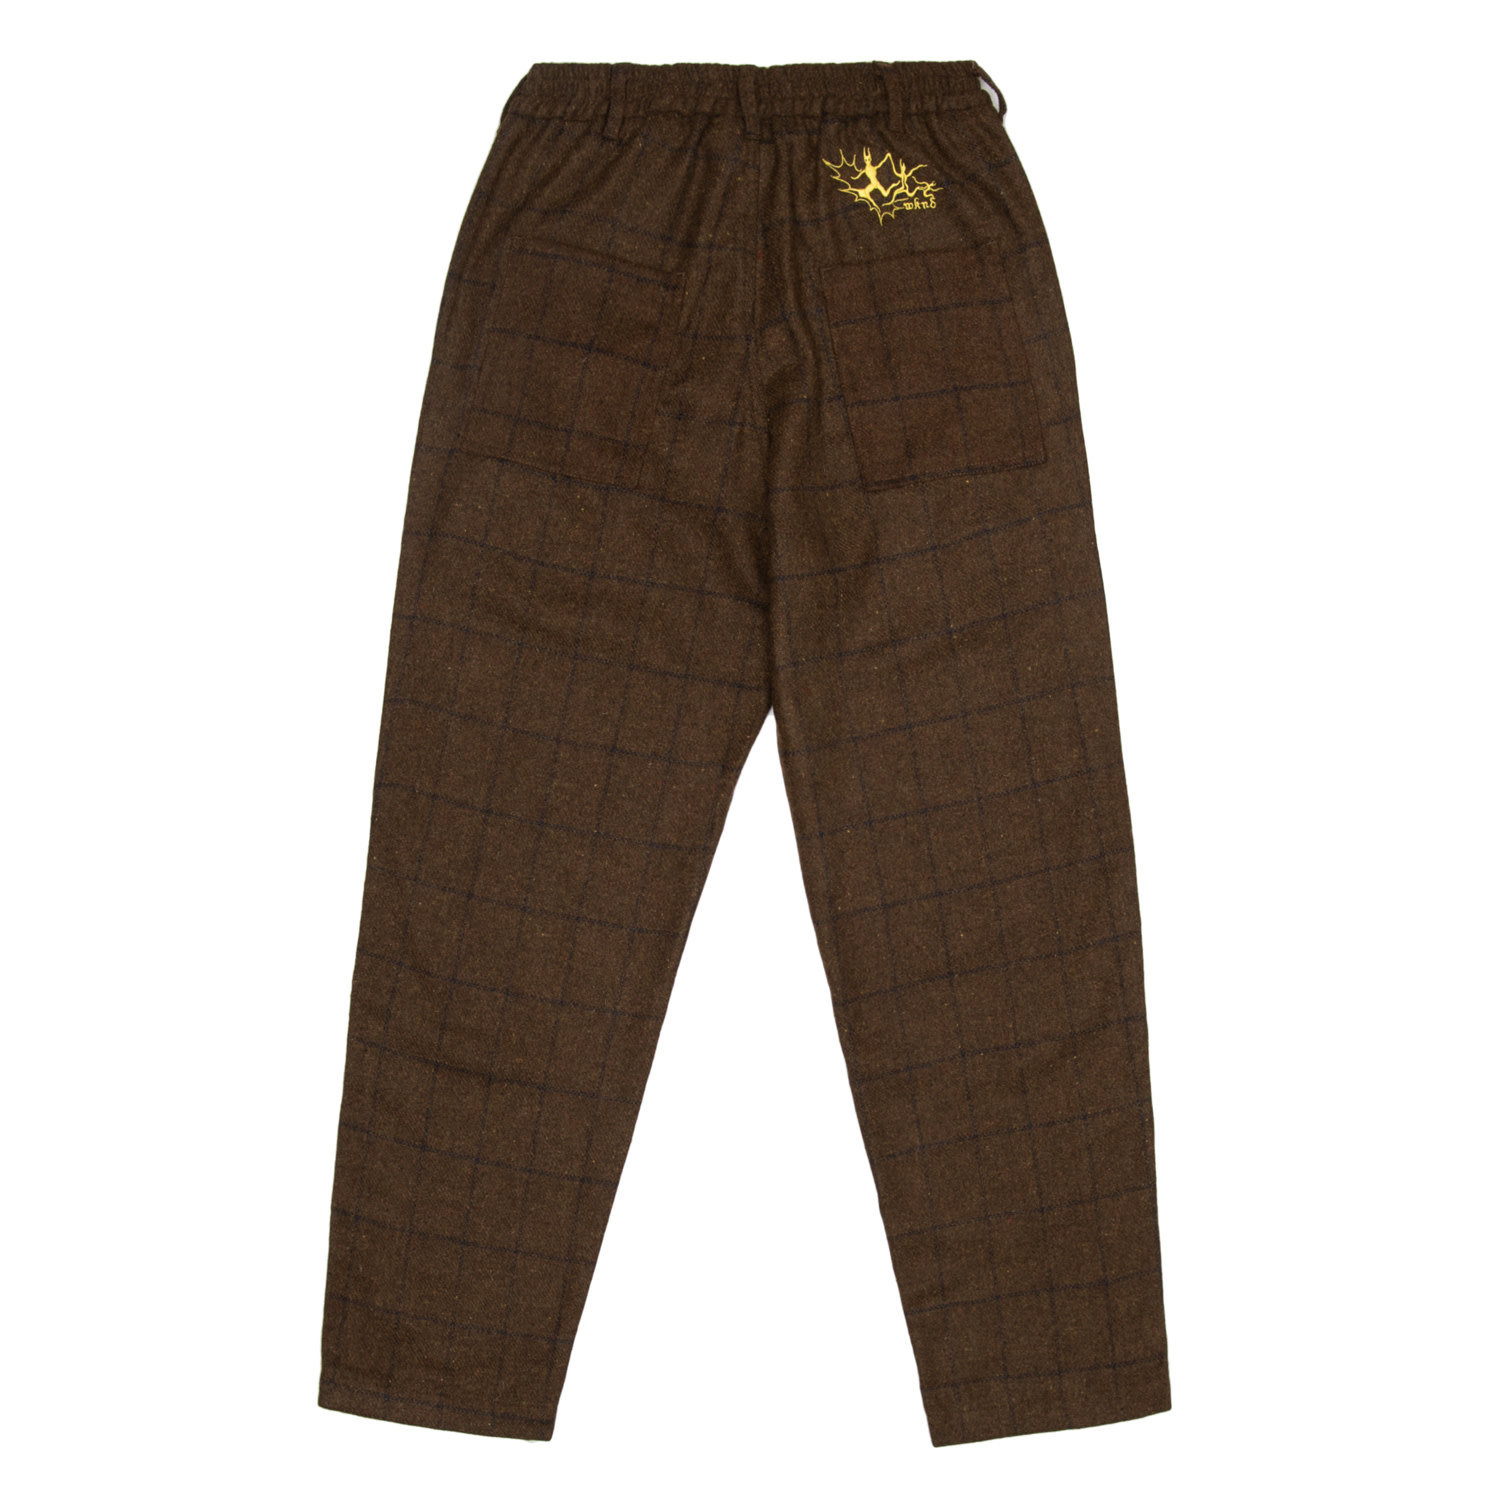 WKND Loosies Brown Check Woven Pant